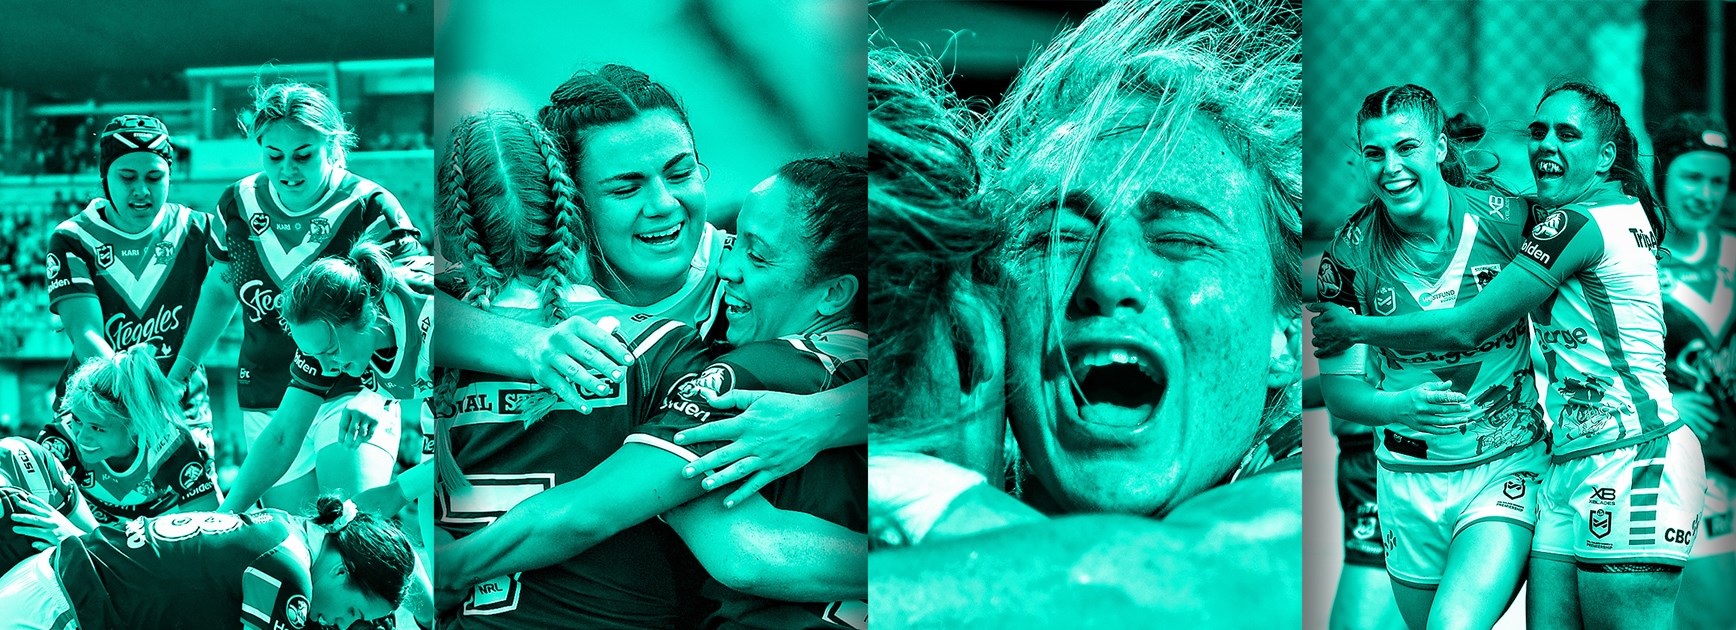 Not expendable: NRL's strong message on women's sport